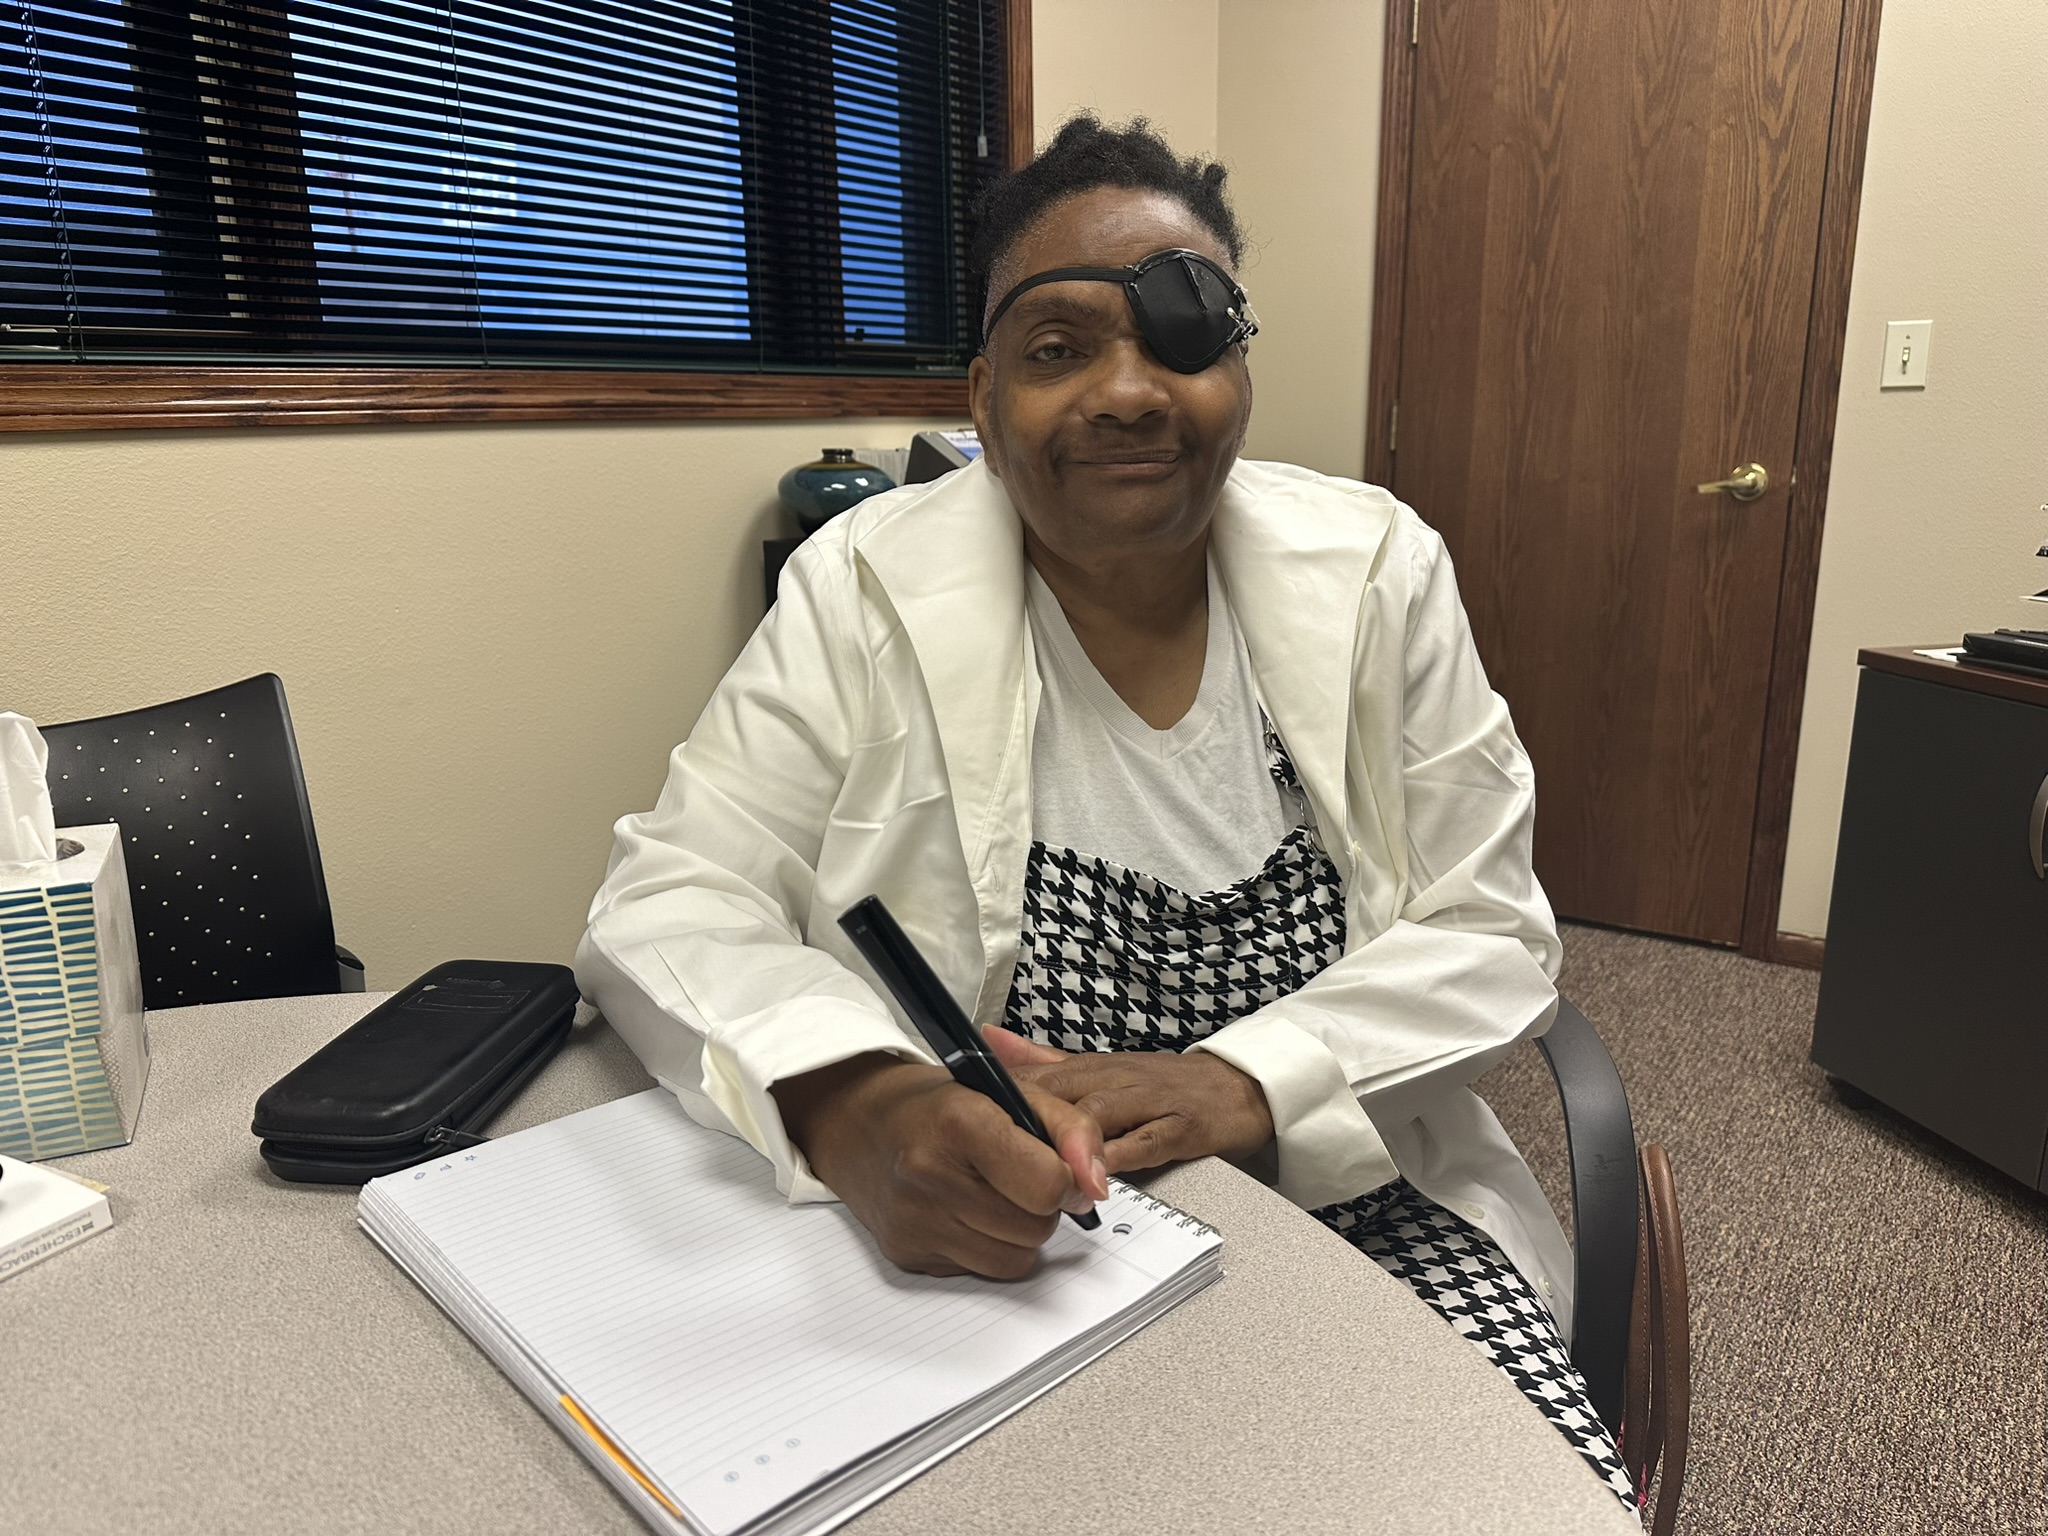 Rita Plair is pictured with a smart pen she received through North Dakota Assistive. Rita is wearing a white coat with a white t-shirt underneath and a black and white checkered dress.